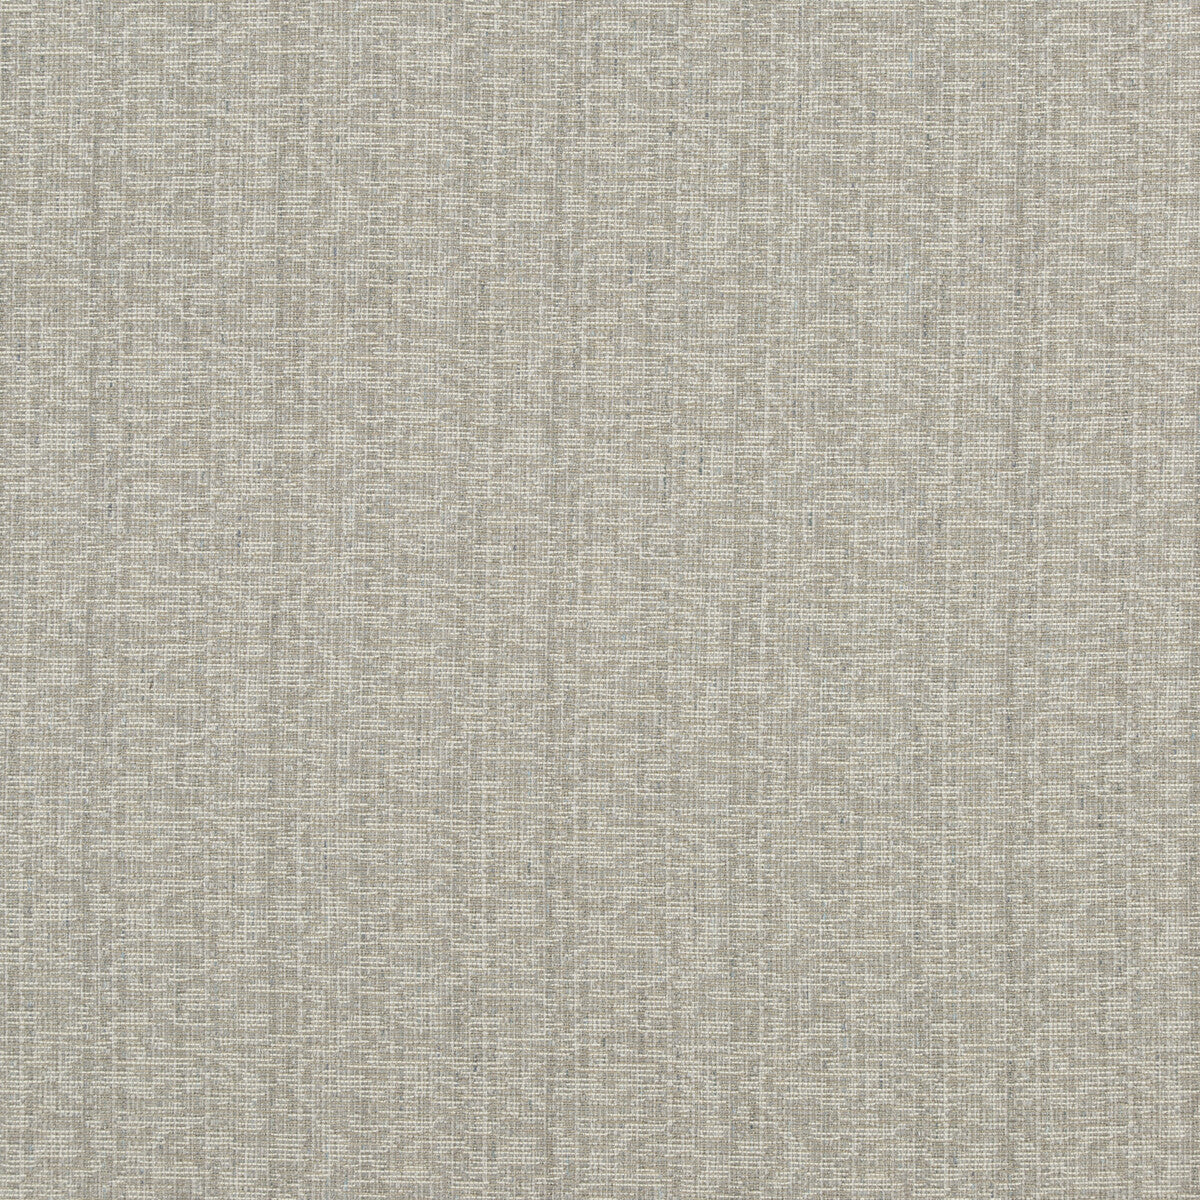 Camina fabric in dove grey color - pattern BF10726.910.0 - by G P &amp; J Baker in the Essential Colours II collection